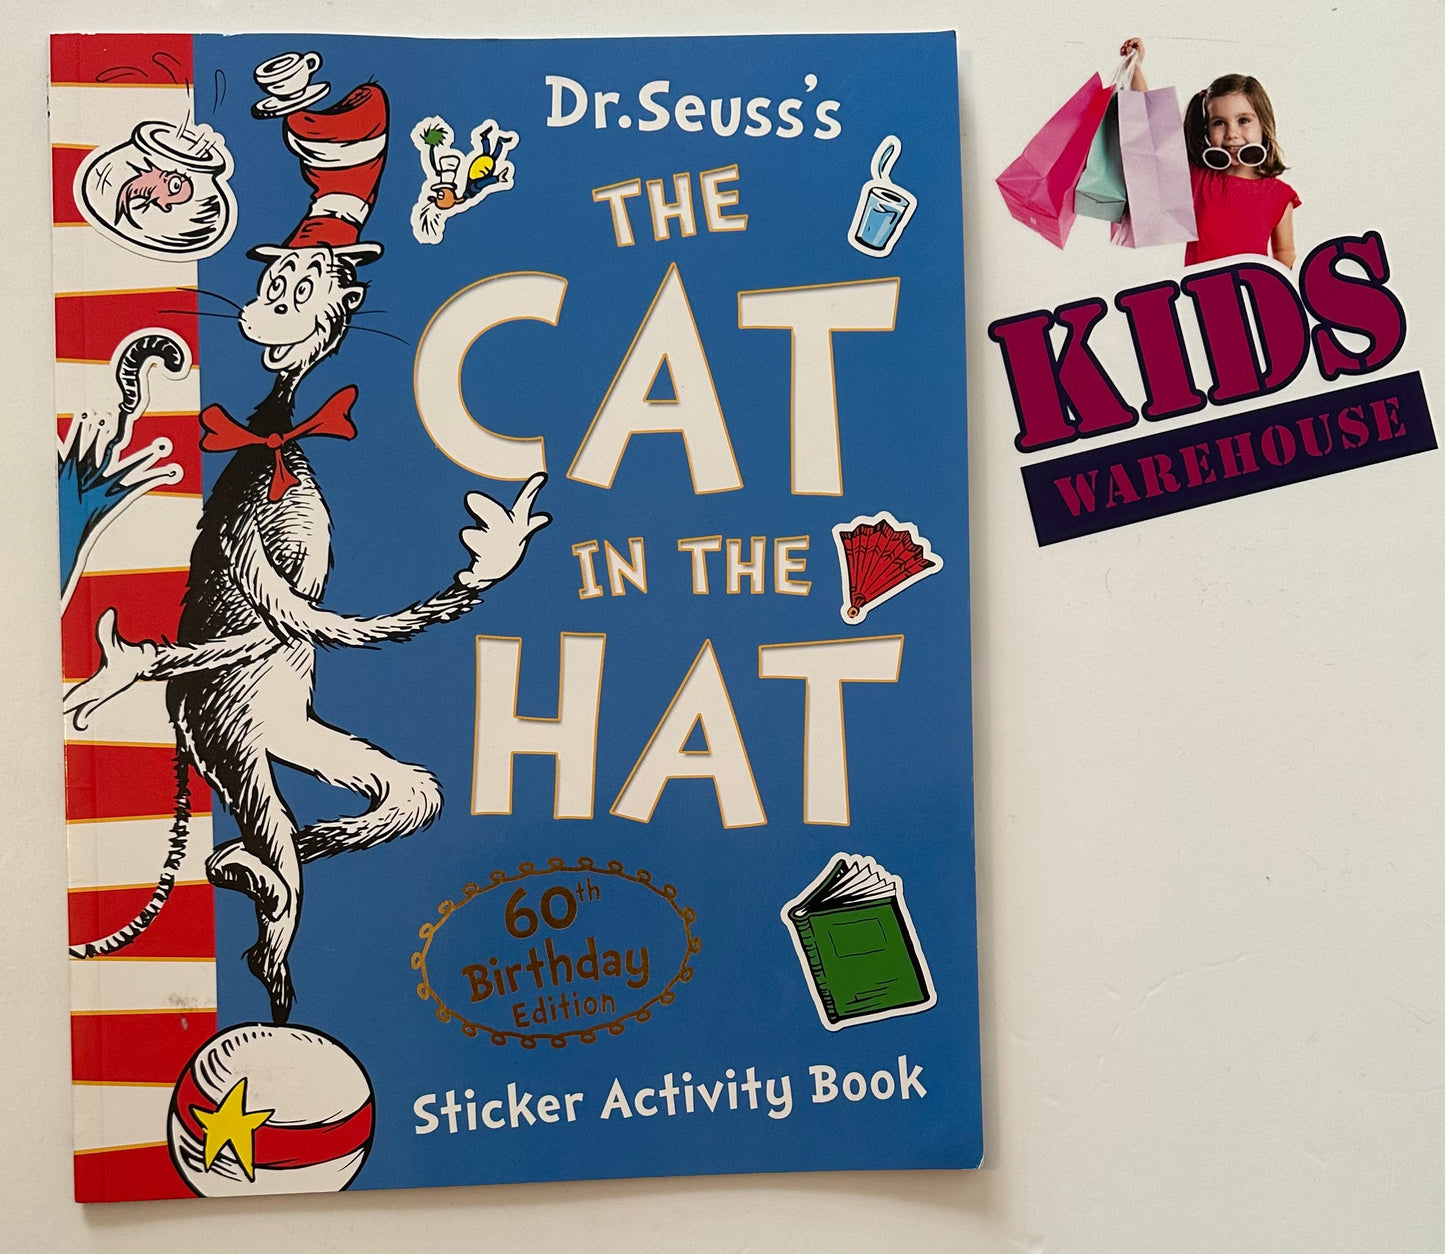 Dr.Seuss’s The Cat in the Hat 60th Birthday Edition -Sticker Activity Book